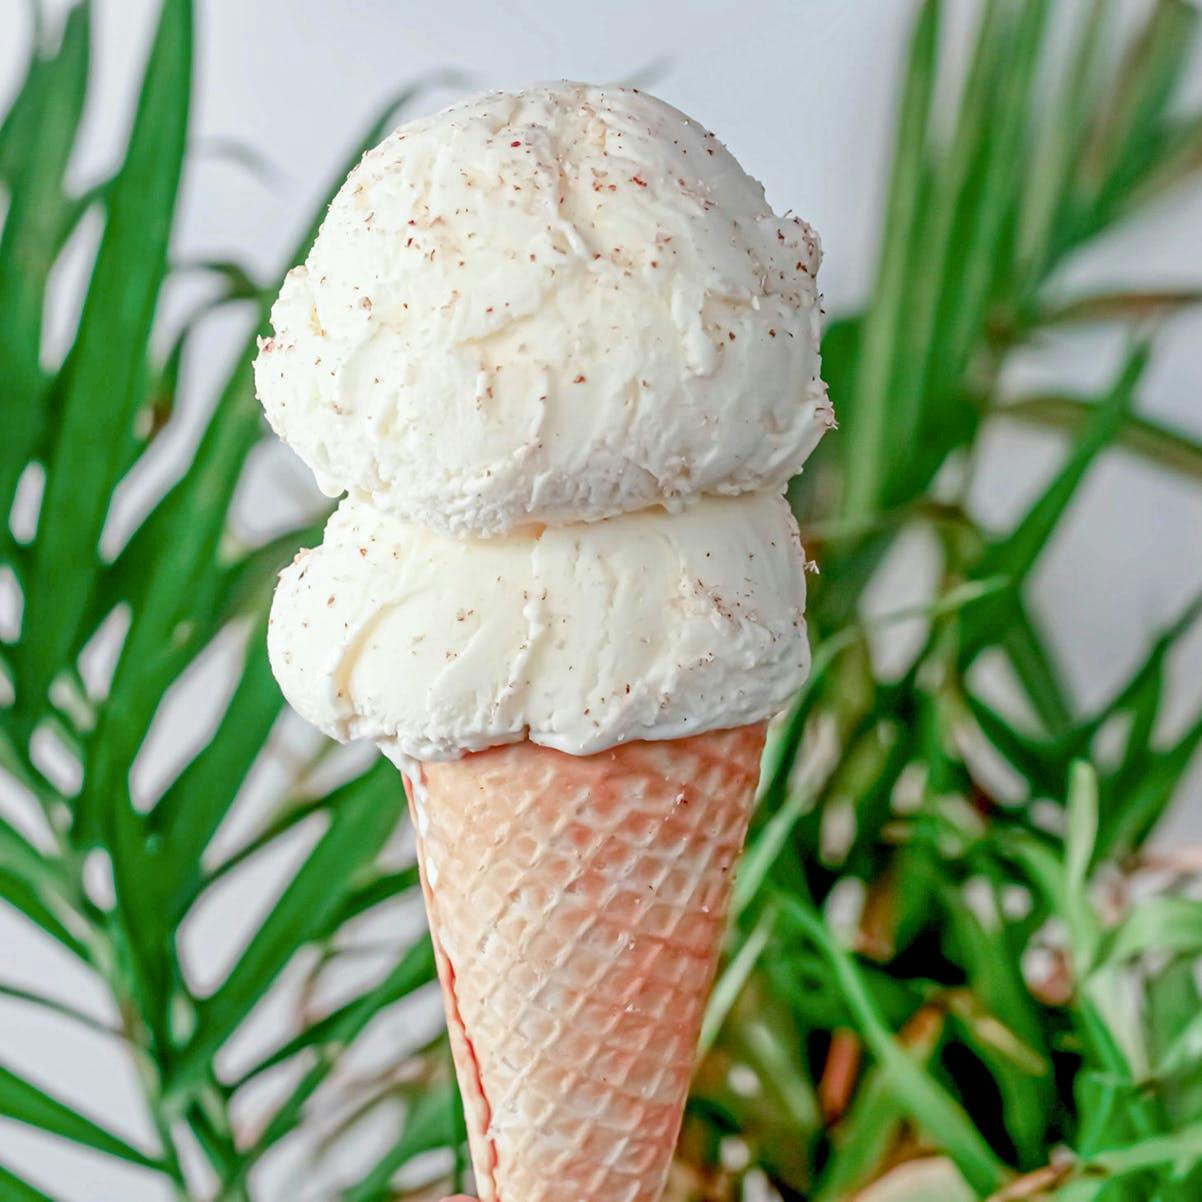 10 Delicious Ice Cream and Frozen Treat Spots in Los Angeles - The New York  Times